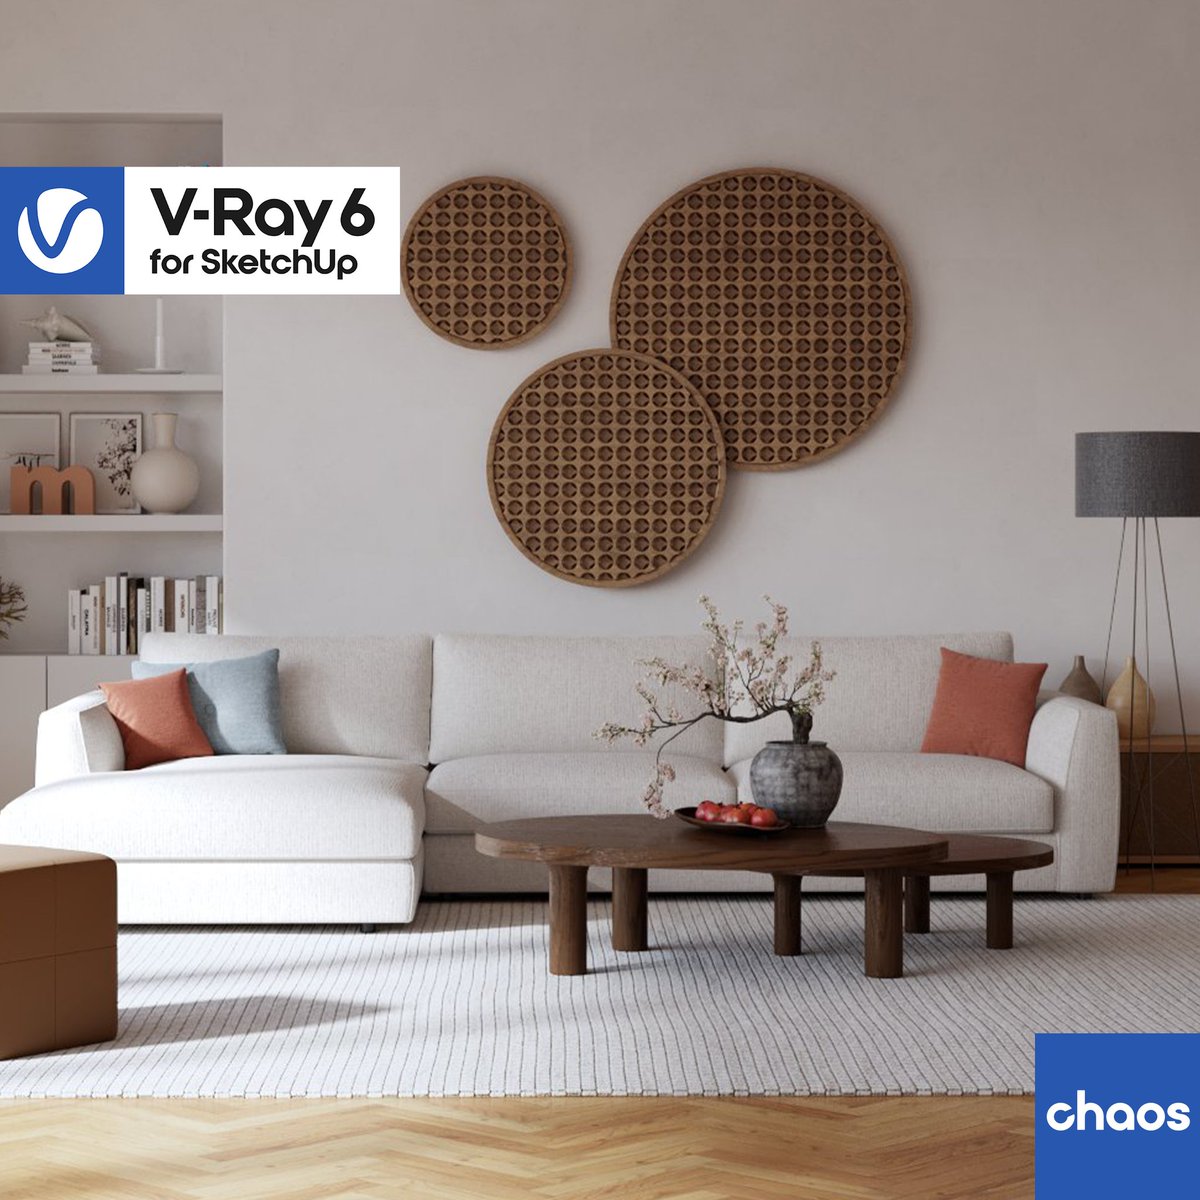 🖥️ V-Ray 6 for SketchUp now supports SketchUp 2024! 🏠 We've updated V-Ray 6 for @SketchUp to support the latest version of SketchUp and a few other fixes and improvements. 🔗 Download the hotfix today 👉 bit.ly/4cL9UyX